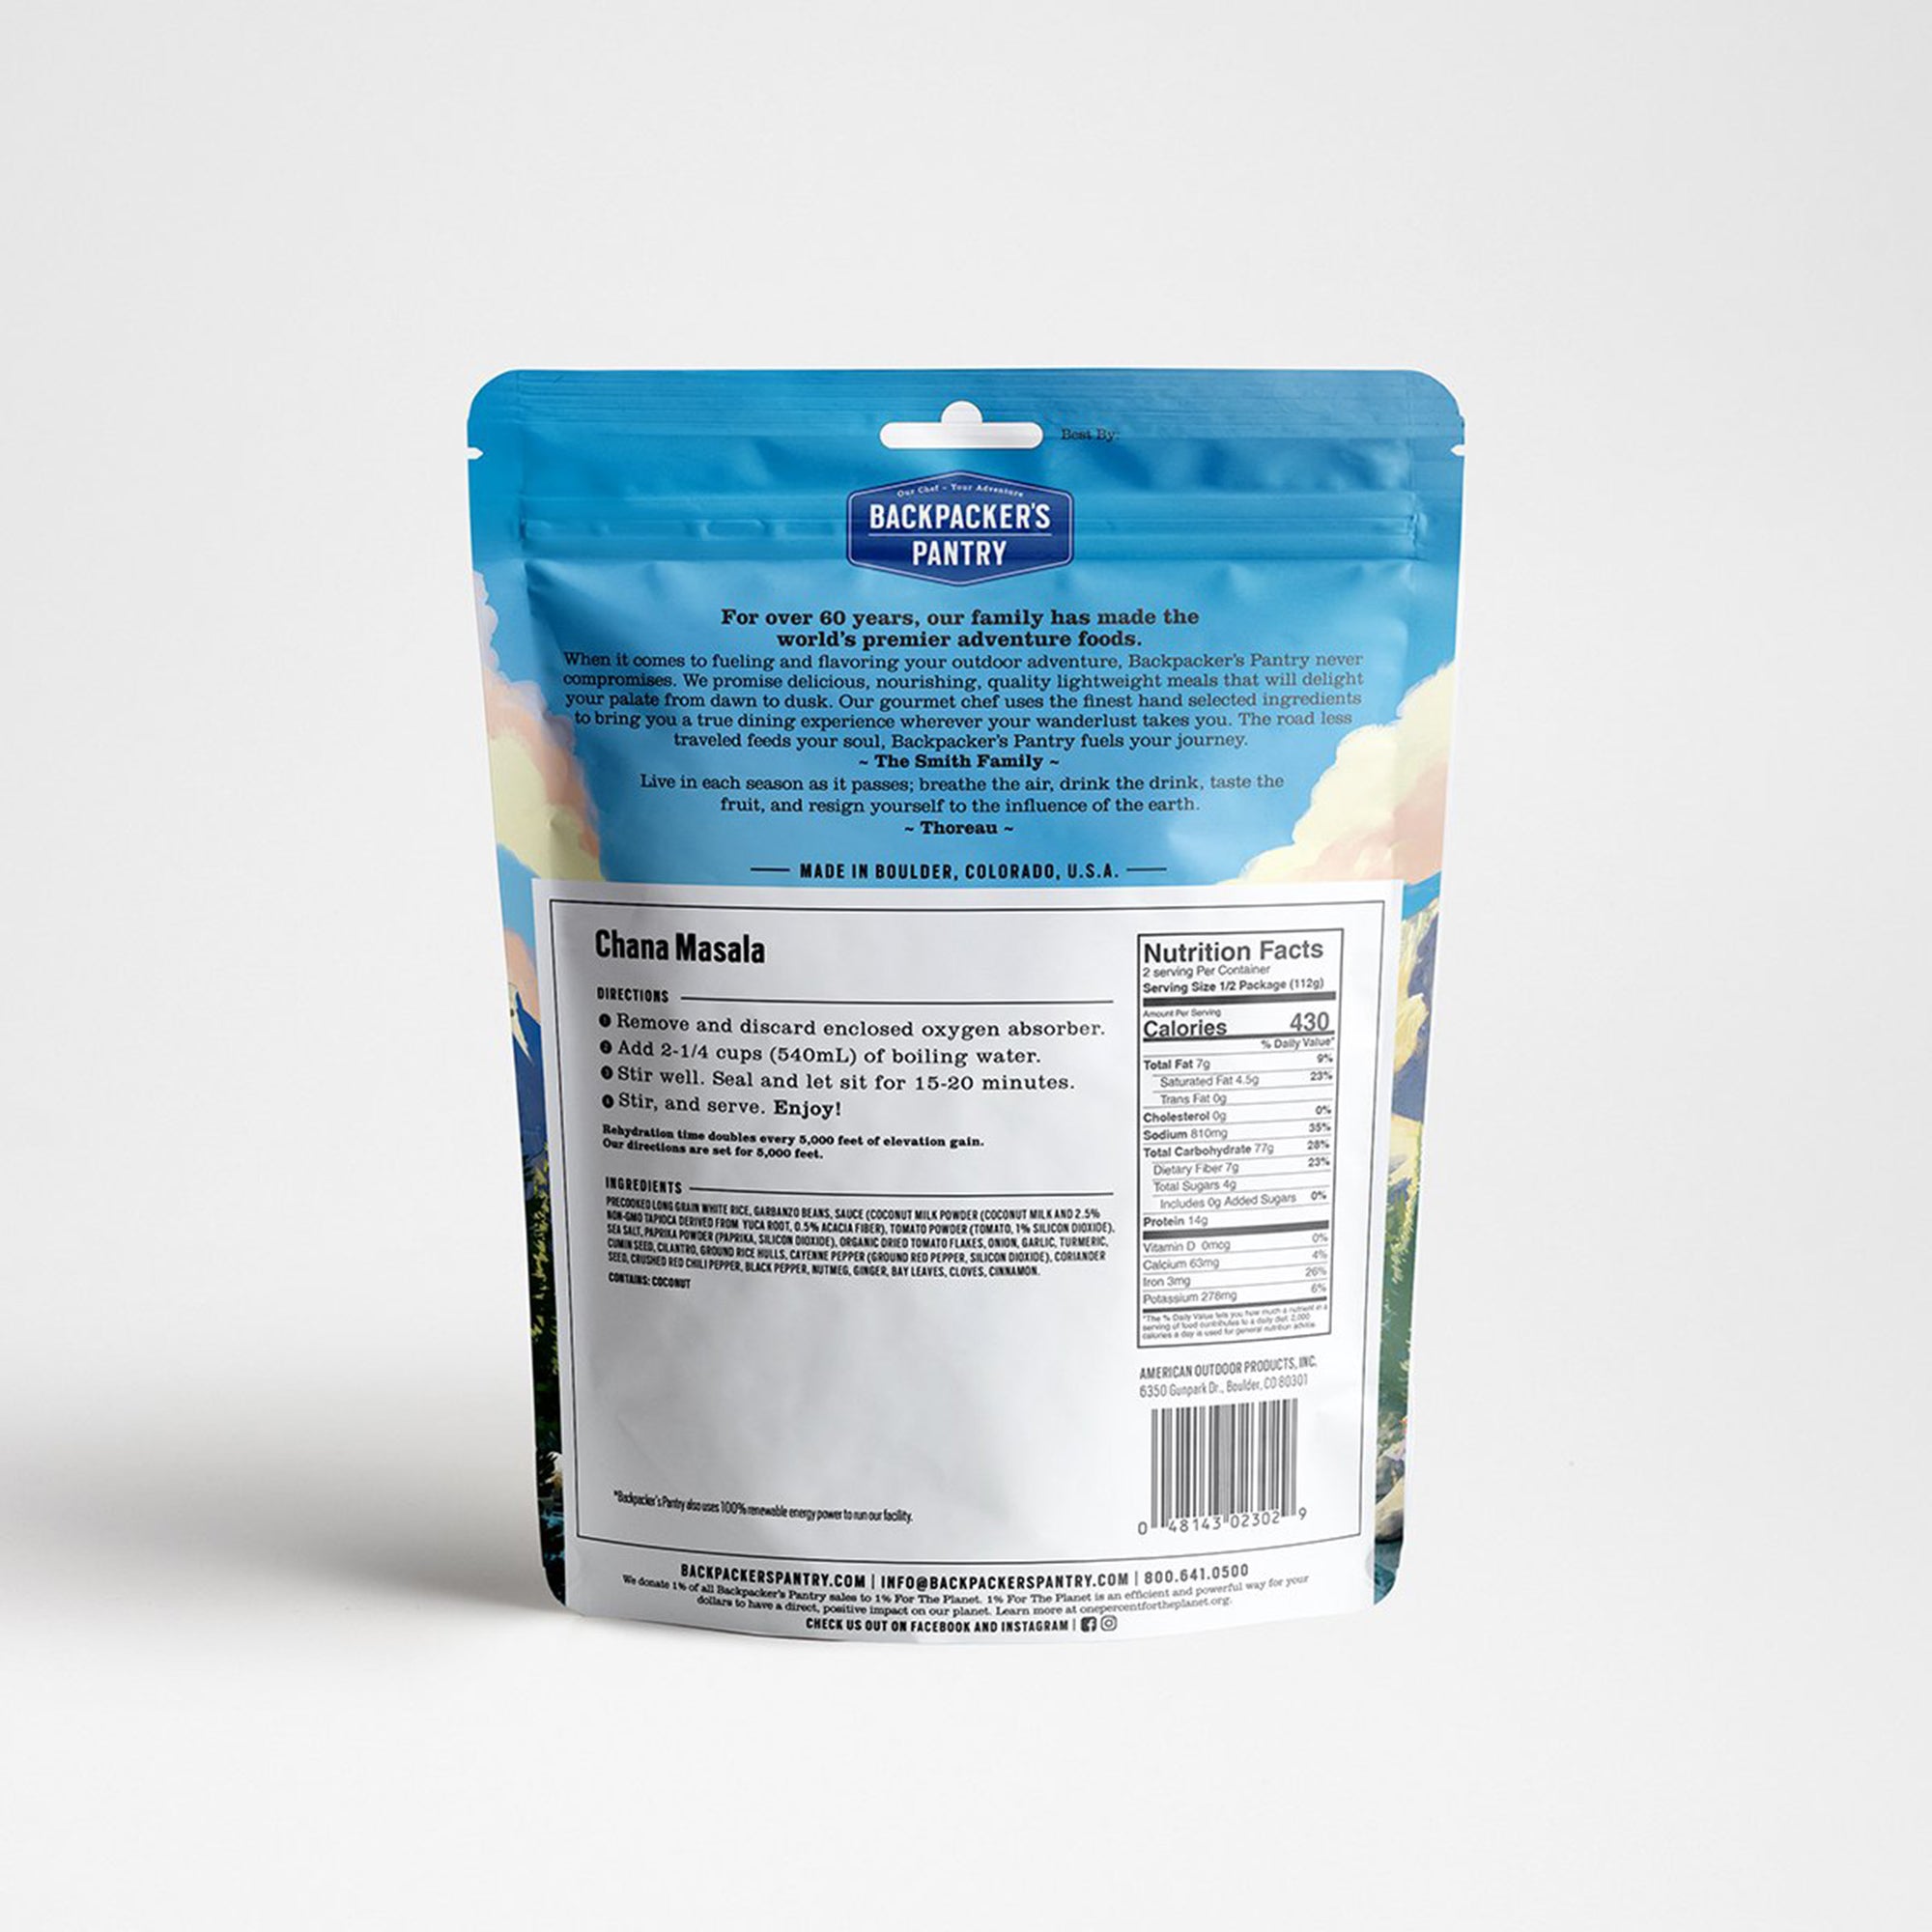 A photo of Backpackers Pantry Chana Masala packaging, the back of the package